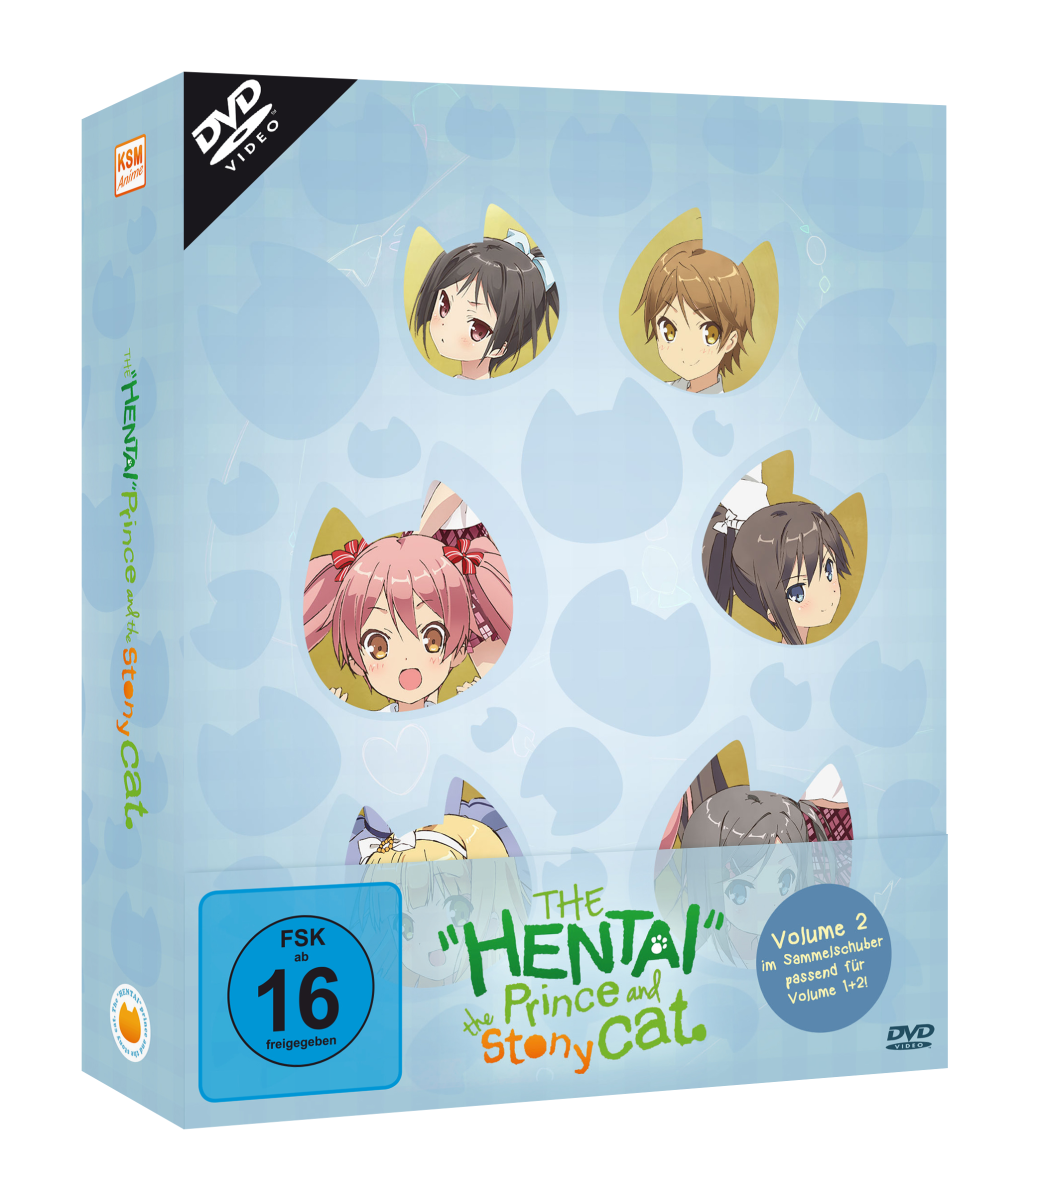 Prince And The Stony Cat The Hentai Prince and the Stony Cat - Volume 2: Episode 7-12 inkl.  Sammelschuber [DVD] | Anime Planet